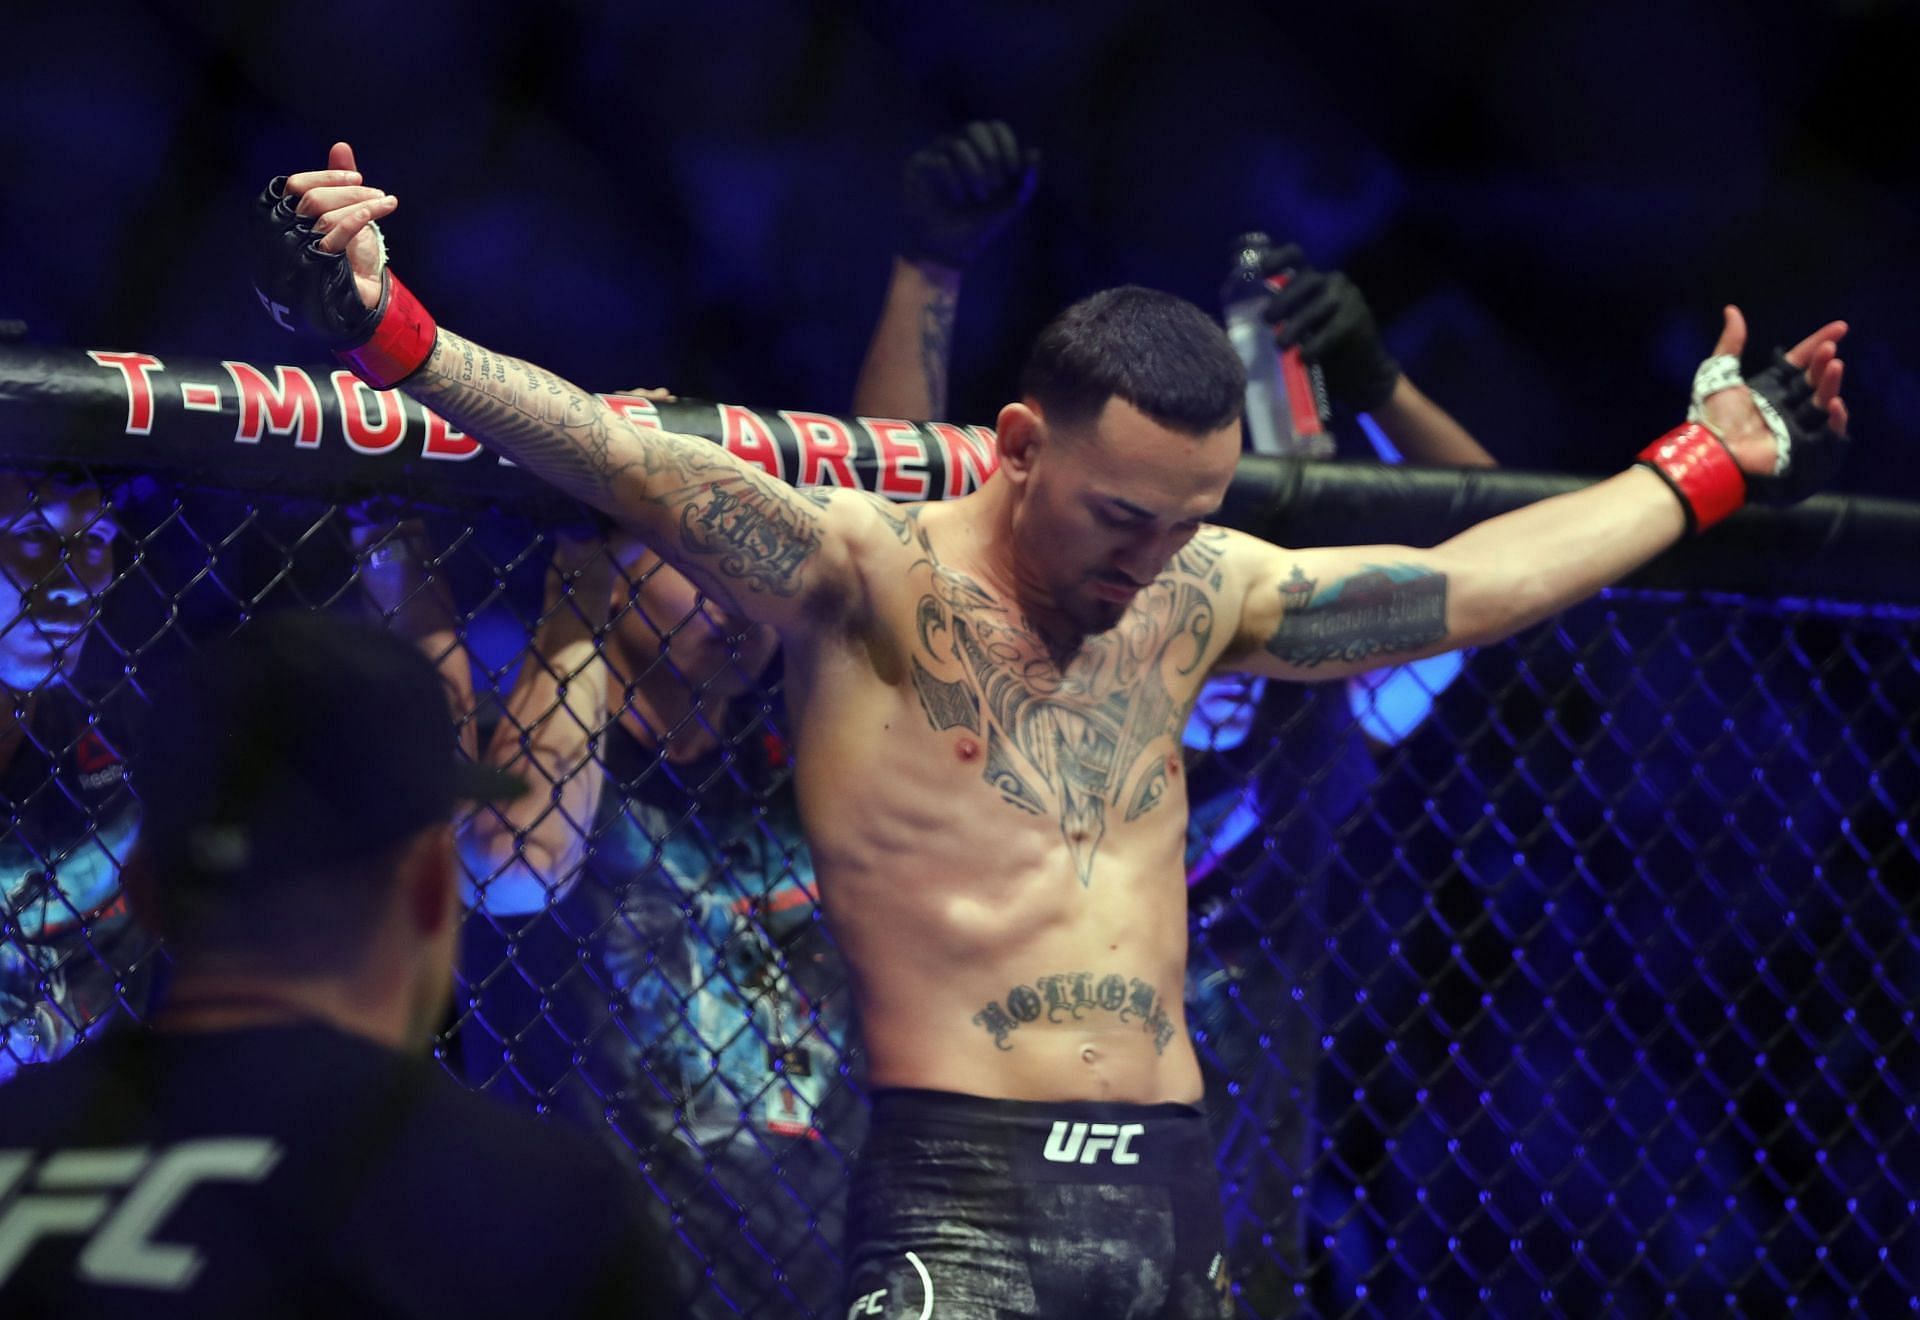 5 UFC fighters who have the best tattoos